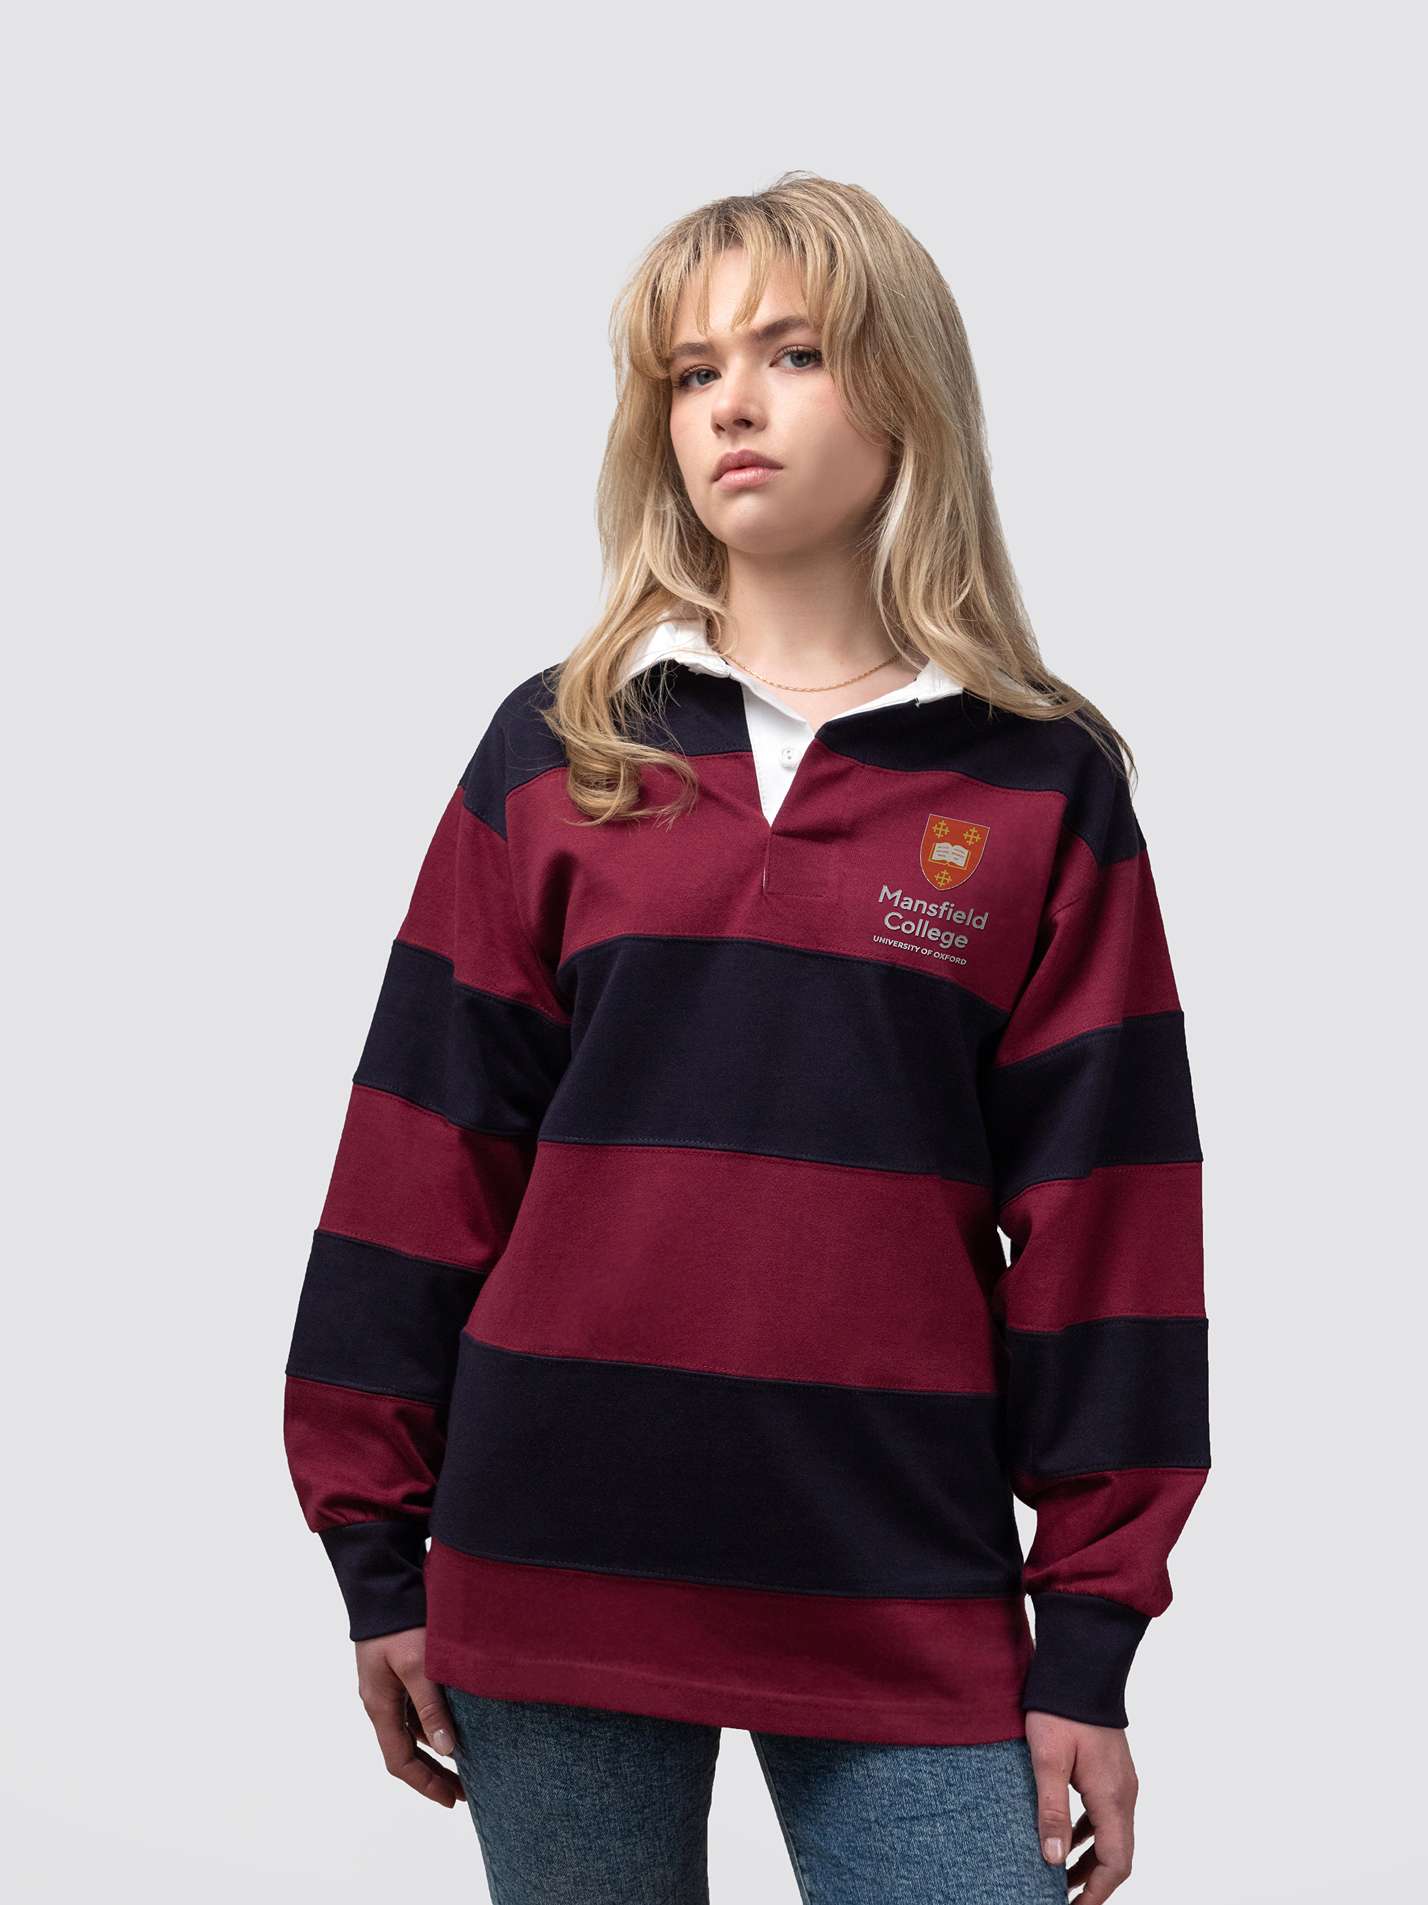 Mansfield College Oxford Unisex Striped Rugby Shirt